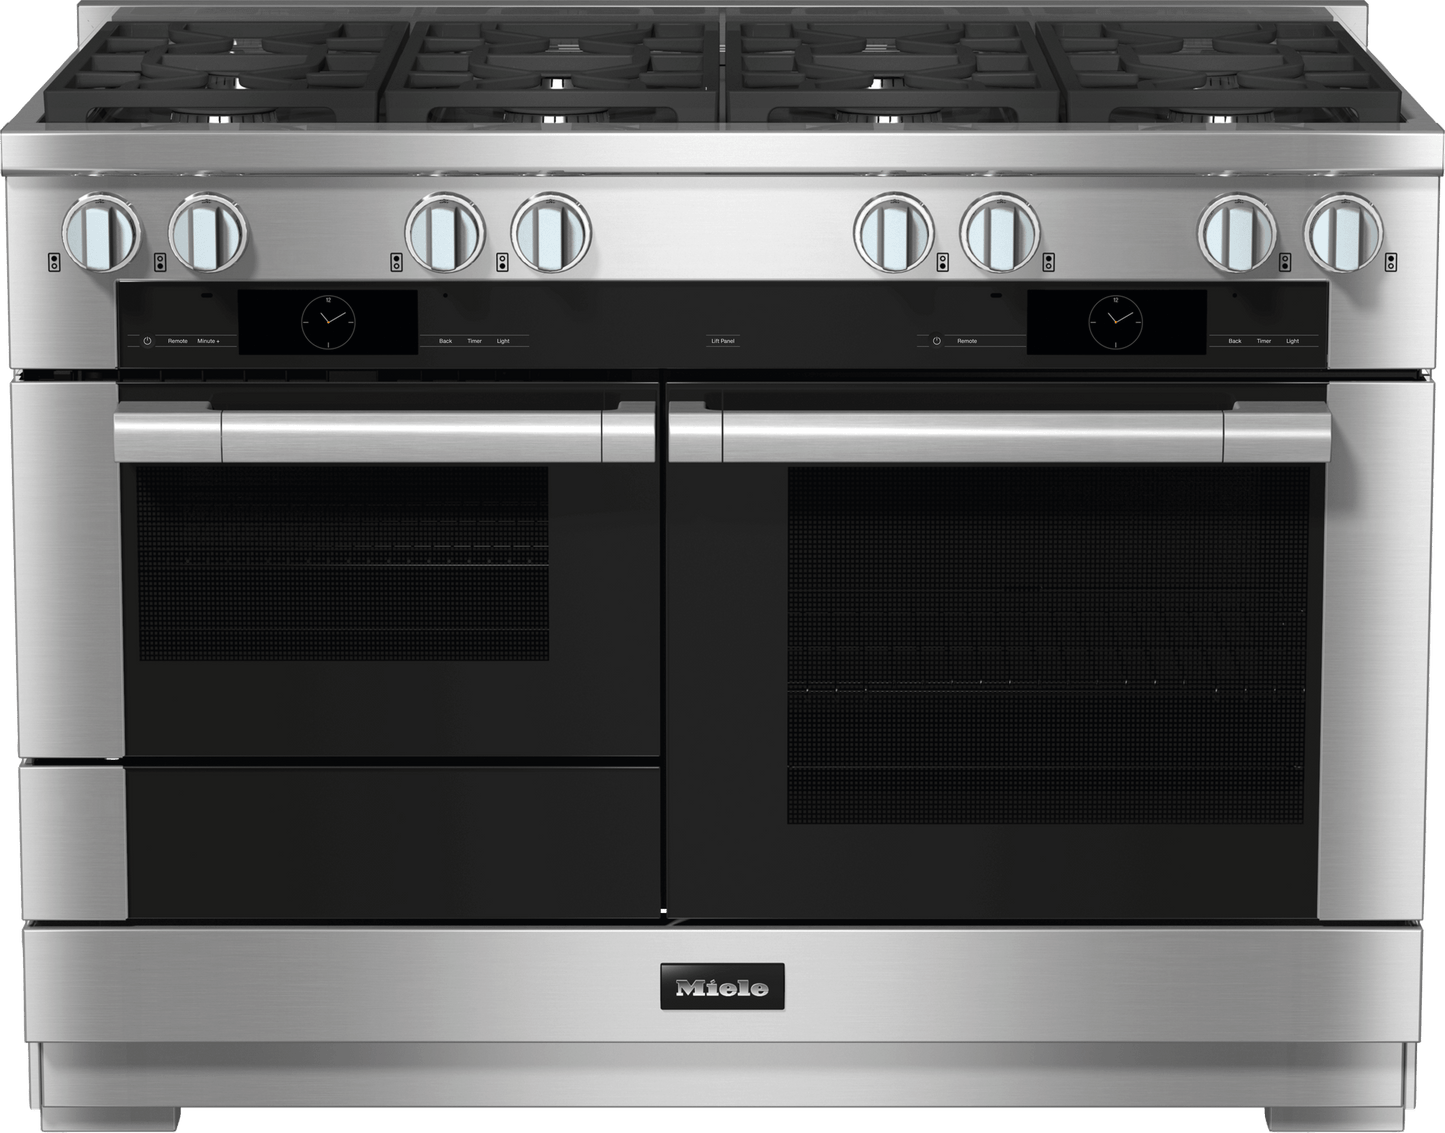 Miele HR19543LPDFCLEANTOUCHSTEEL Hr 1954-3 Lp Df - 48 Inch Range - The Dual Fuel All-Rounder With M Touch For The Highest Demands.